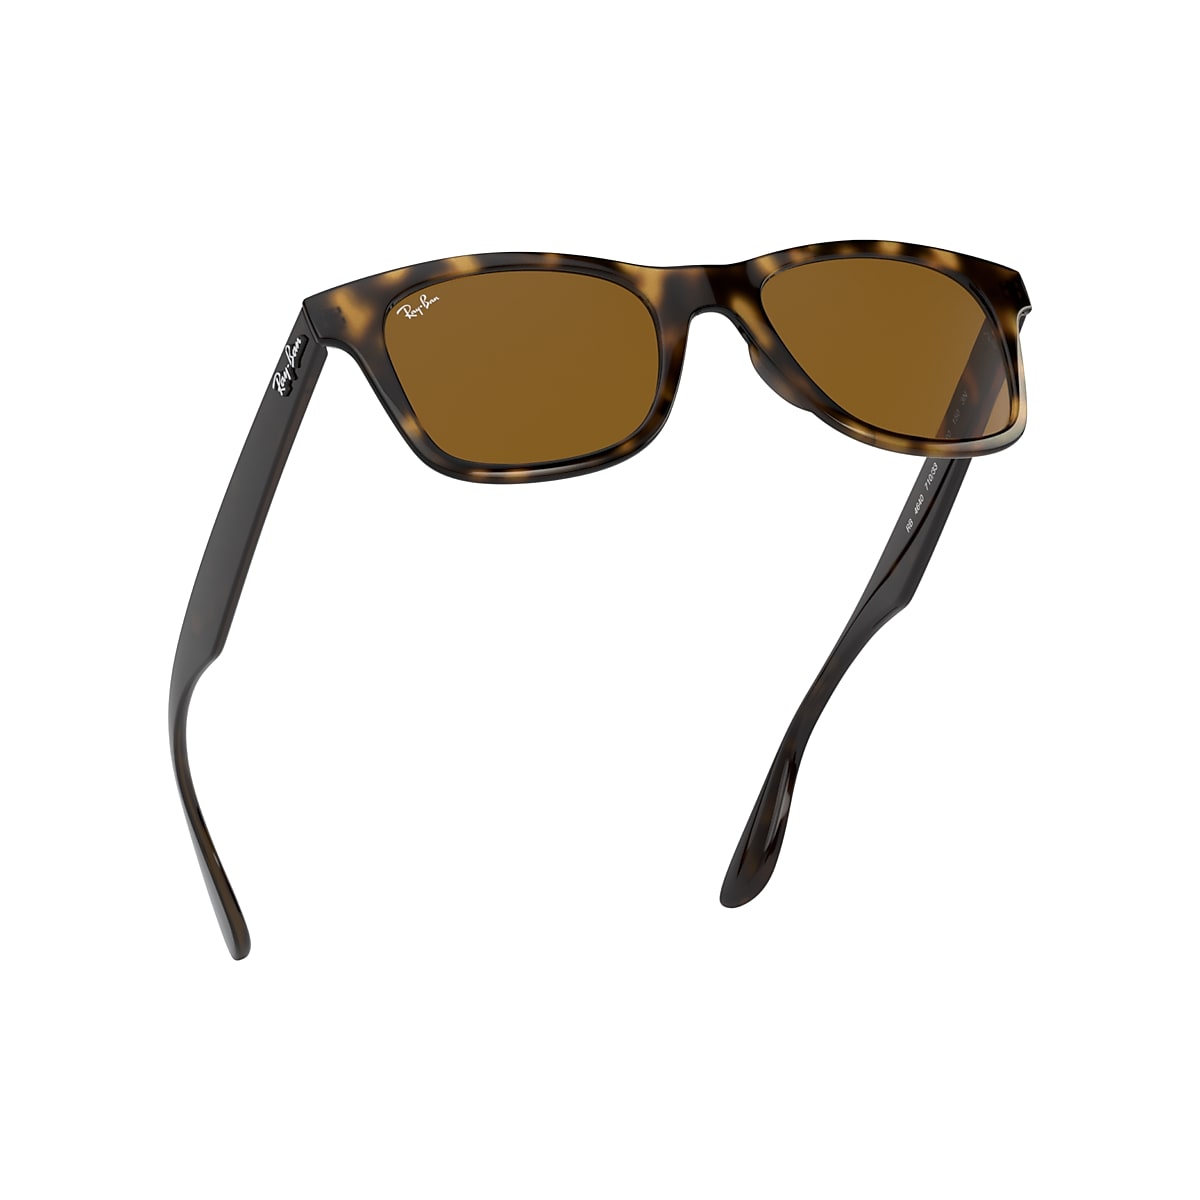 Rb4640 Sunglasses in Shiny Havana and Brown | Ray-Ban®